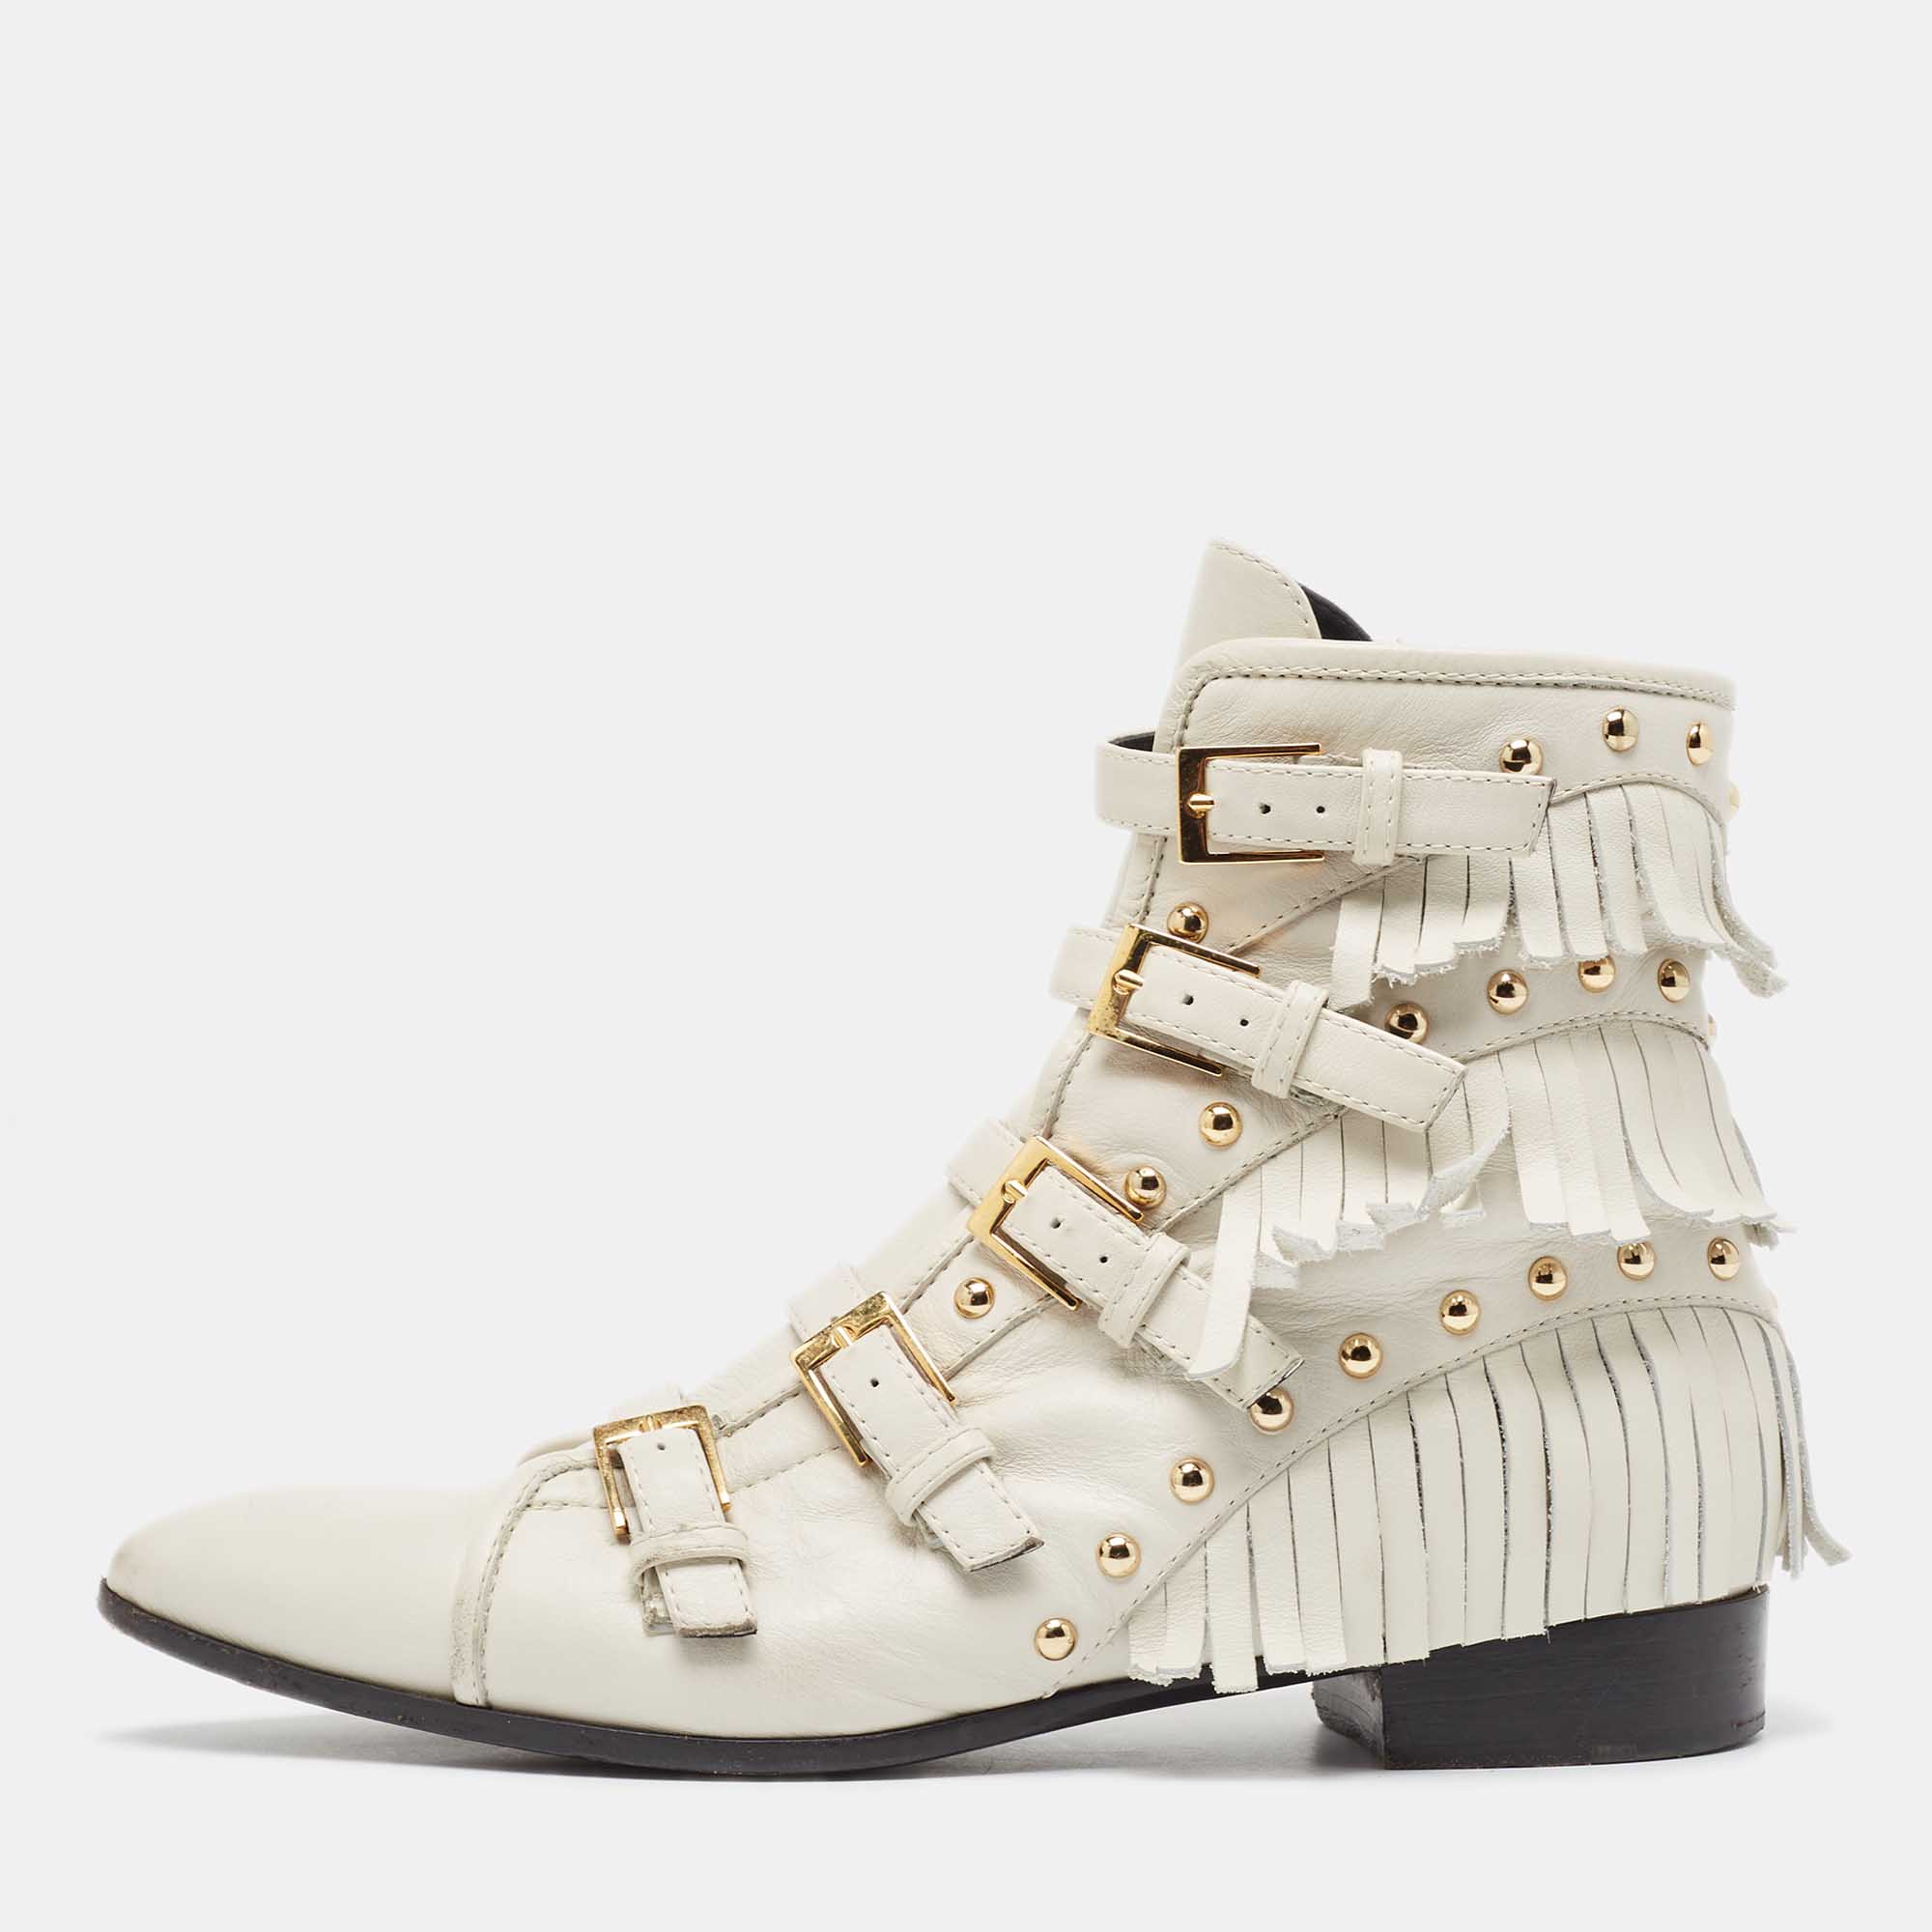 Giuseppe zanotti cream leather studded and fringed buckled ankle boots size 39